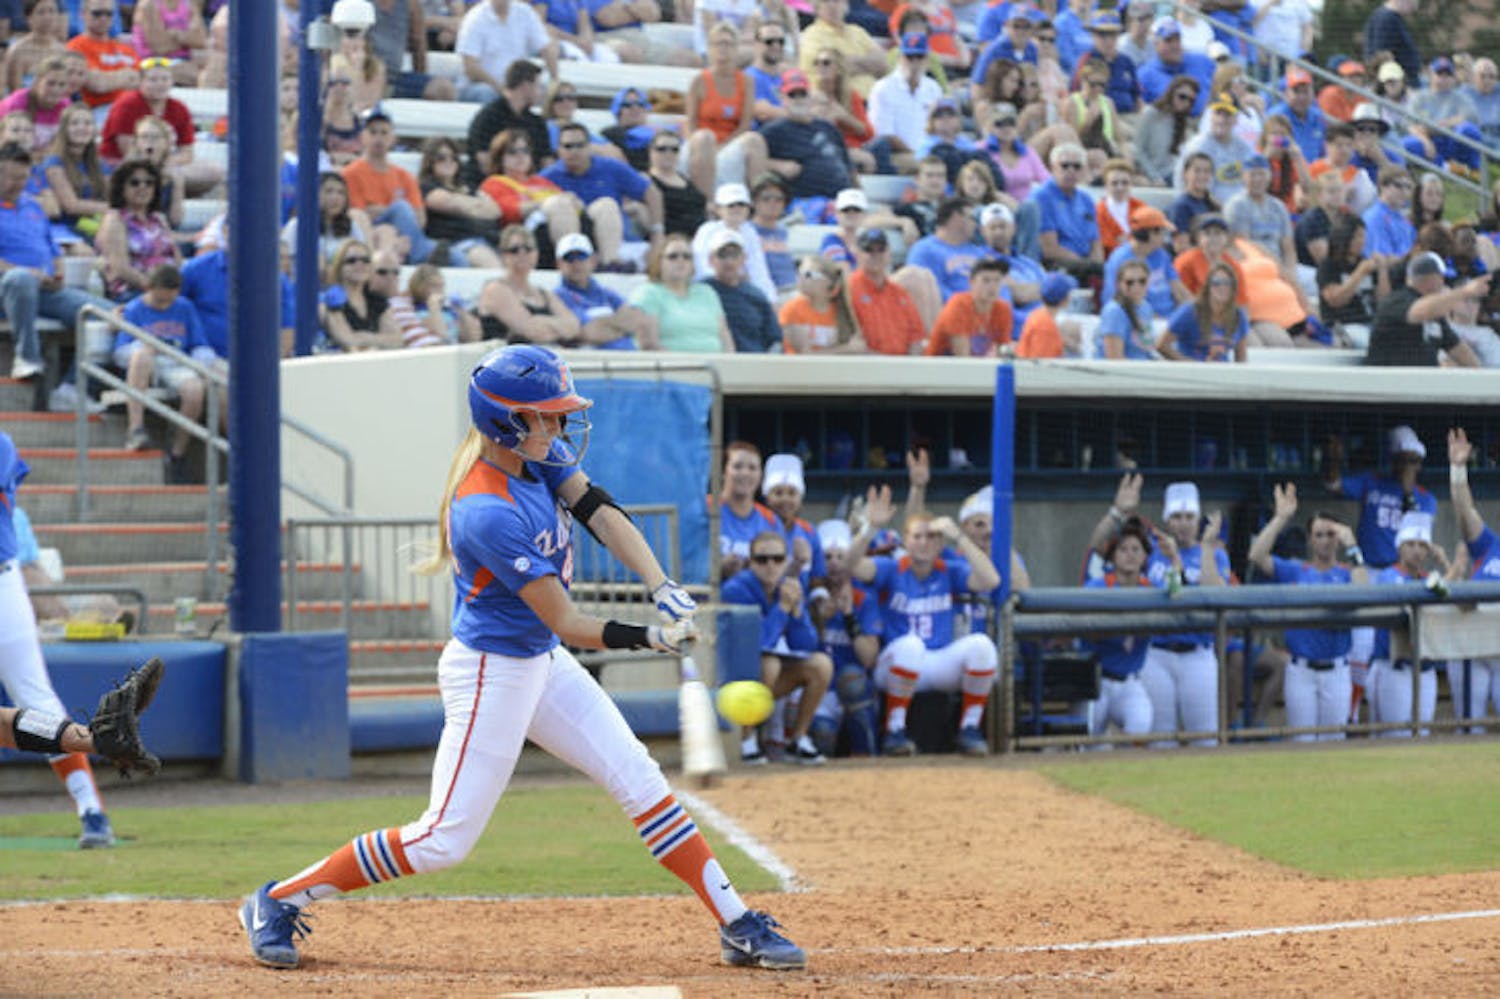 Taylor Schwarz swings at the ball during Florida’s 4-2 victory against Mississippi State on April 6, 2013, at Katie Seashole Pressly Stadium. Schwarz drove in three runs and was hit by two pitches during Florida’s 10-3 win against USF on Thursday in Tampa. Schwarz drew a hit by pitch to start a 7-run rally in the fourth inning.